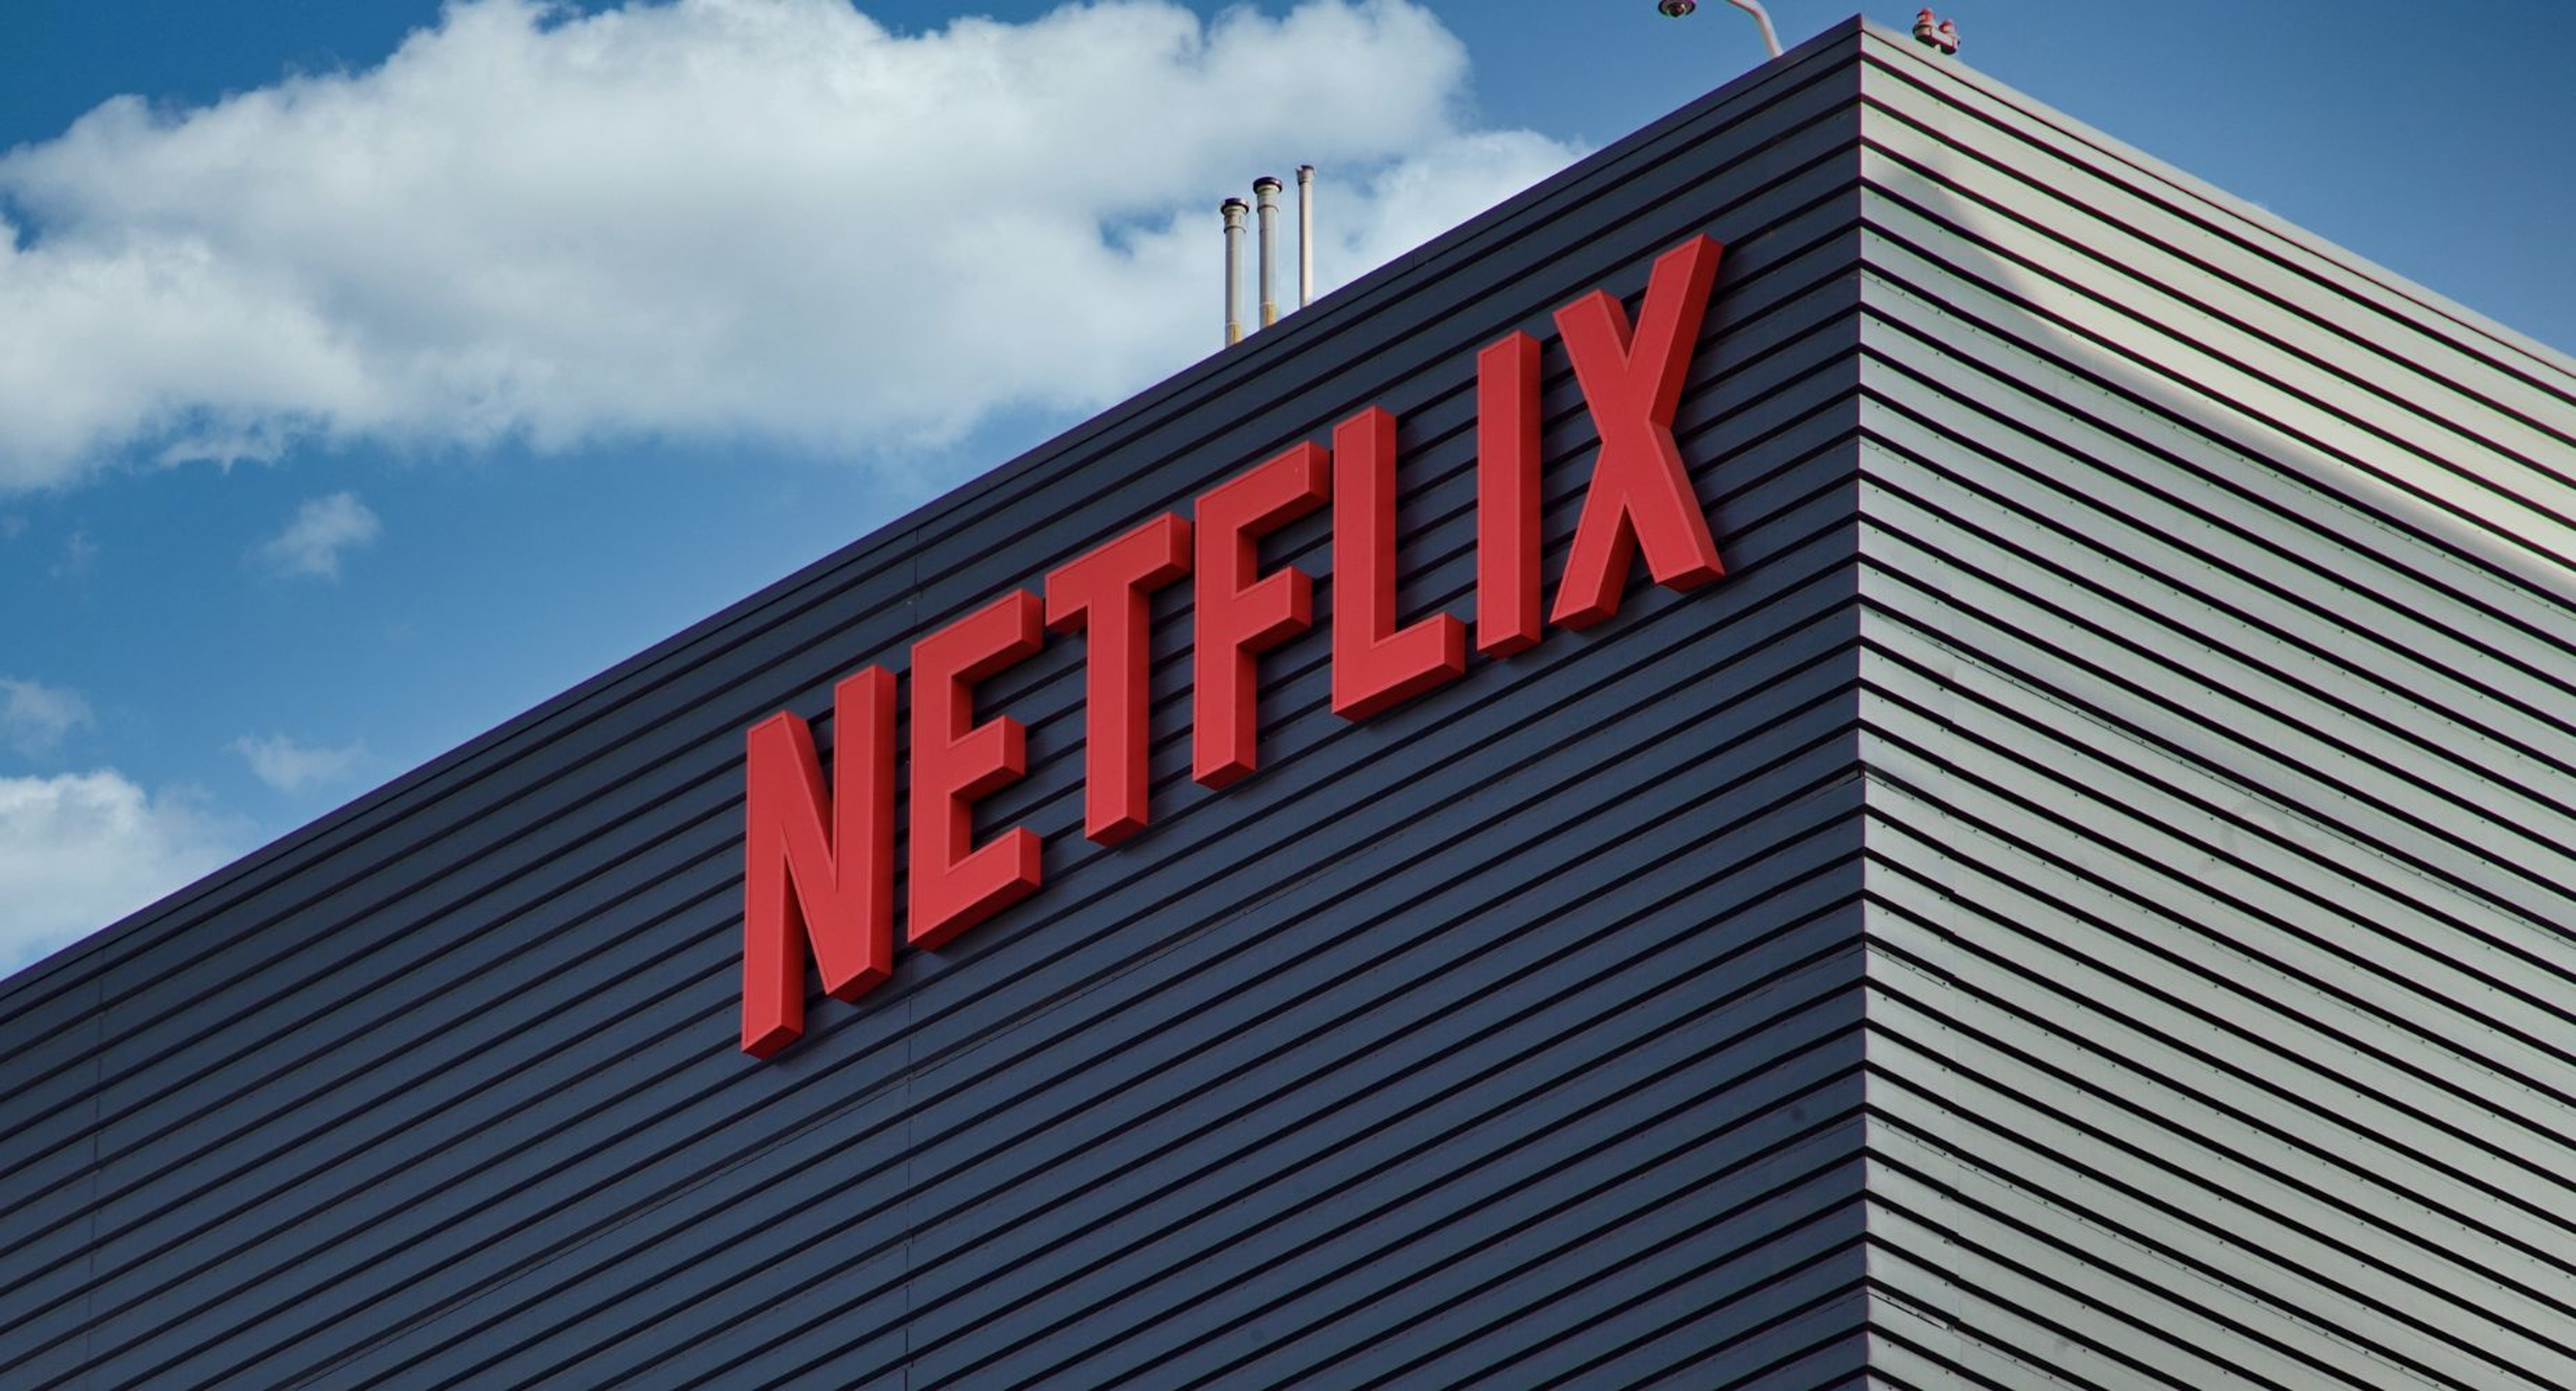 Netflix Options Traders Betting On Stock Moving Lower Amid Password-Sharing Crackdown